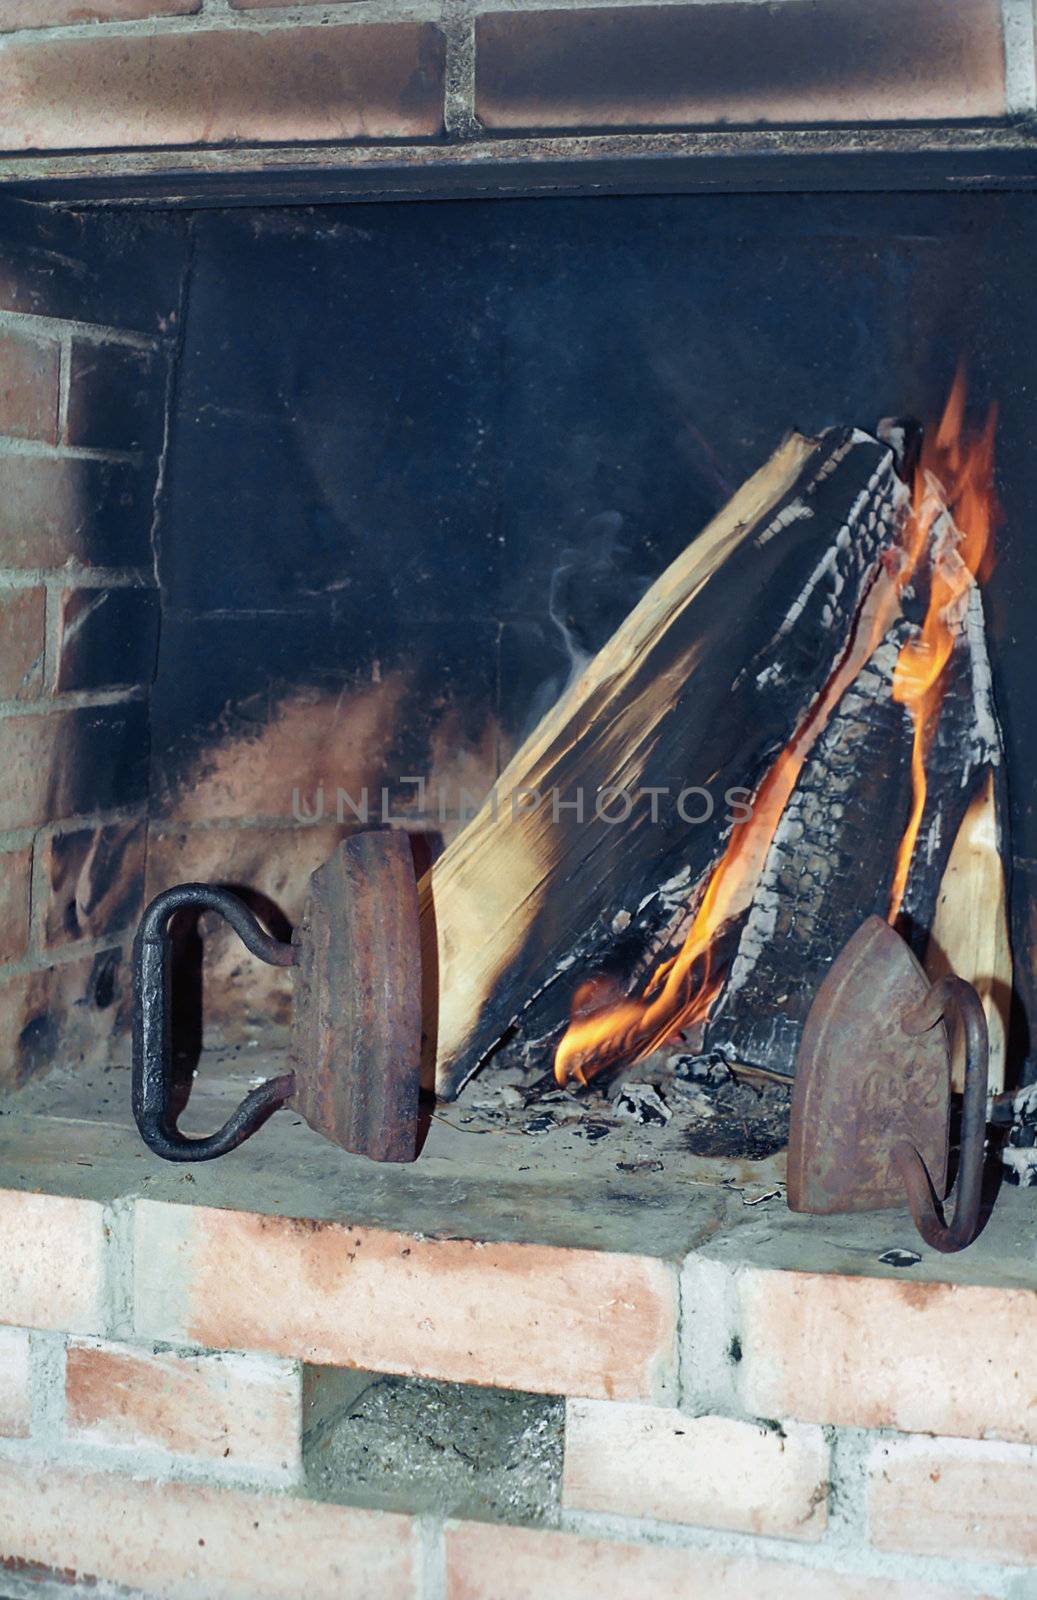 Two old irons in fireplace near burning wood